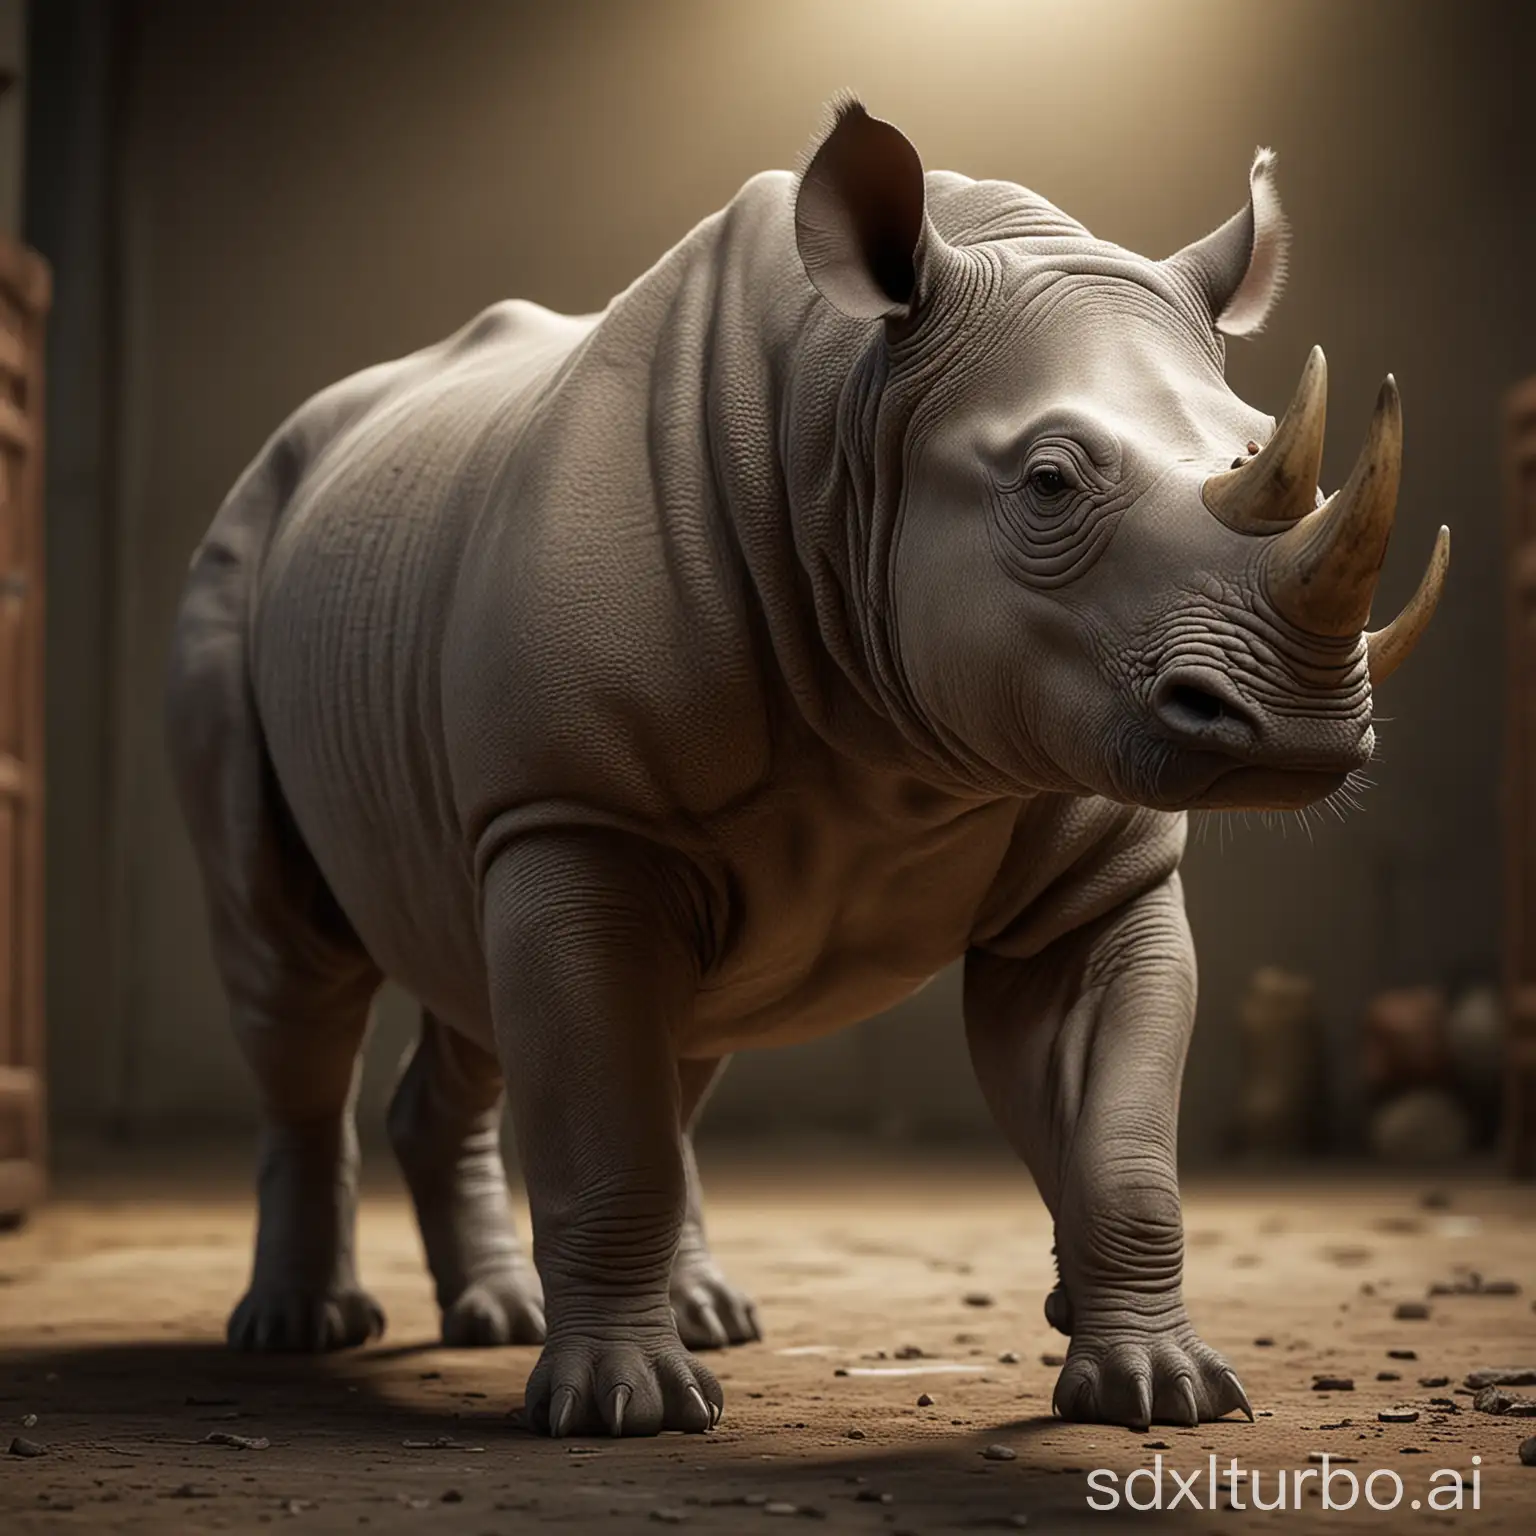 Make me a cat mixed with a rhinoceros in the same body,a cat that looks like a rhinoceros full body,high resolution,Cinematic,amazing,masterpiece,epic,Beautiful Lighting,insanely detailed and intricate,16k